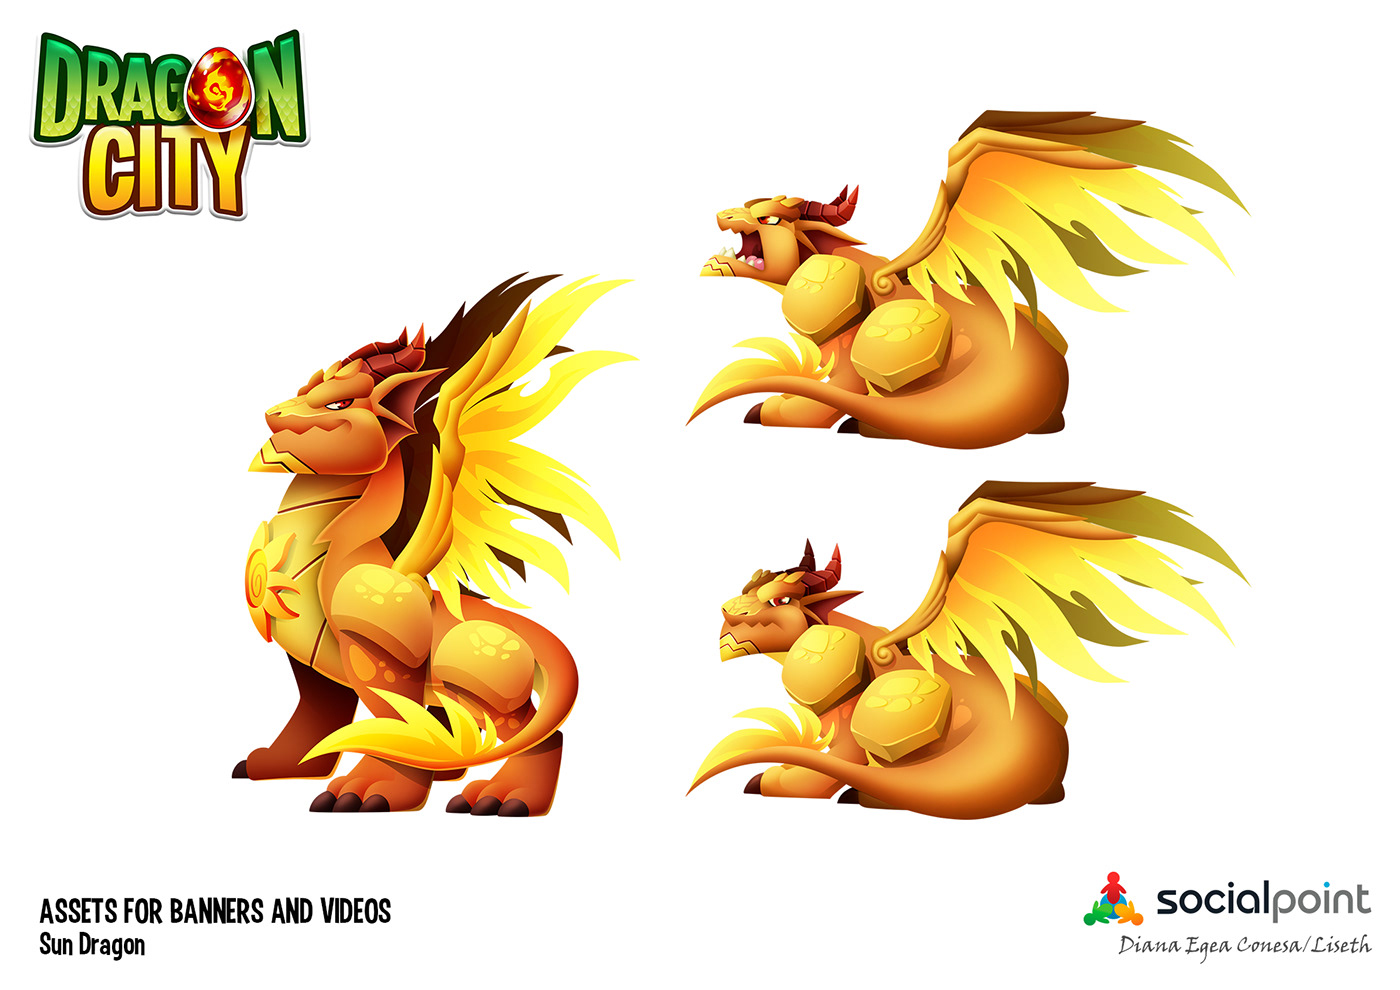 Dragon City,Social Point,videogame,characters,dragons,flame,star,Adobe Phot...